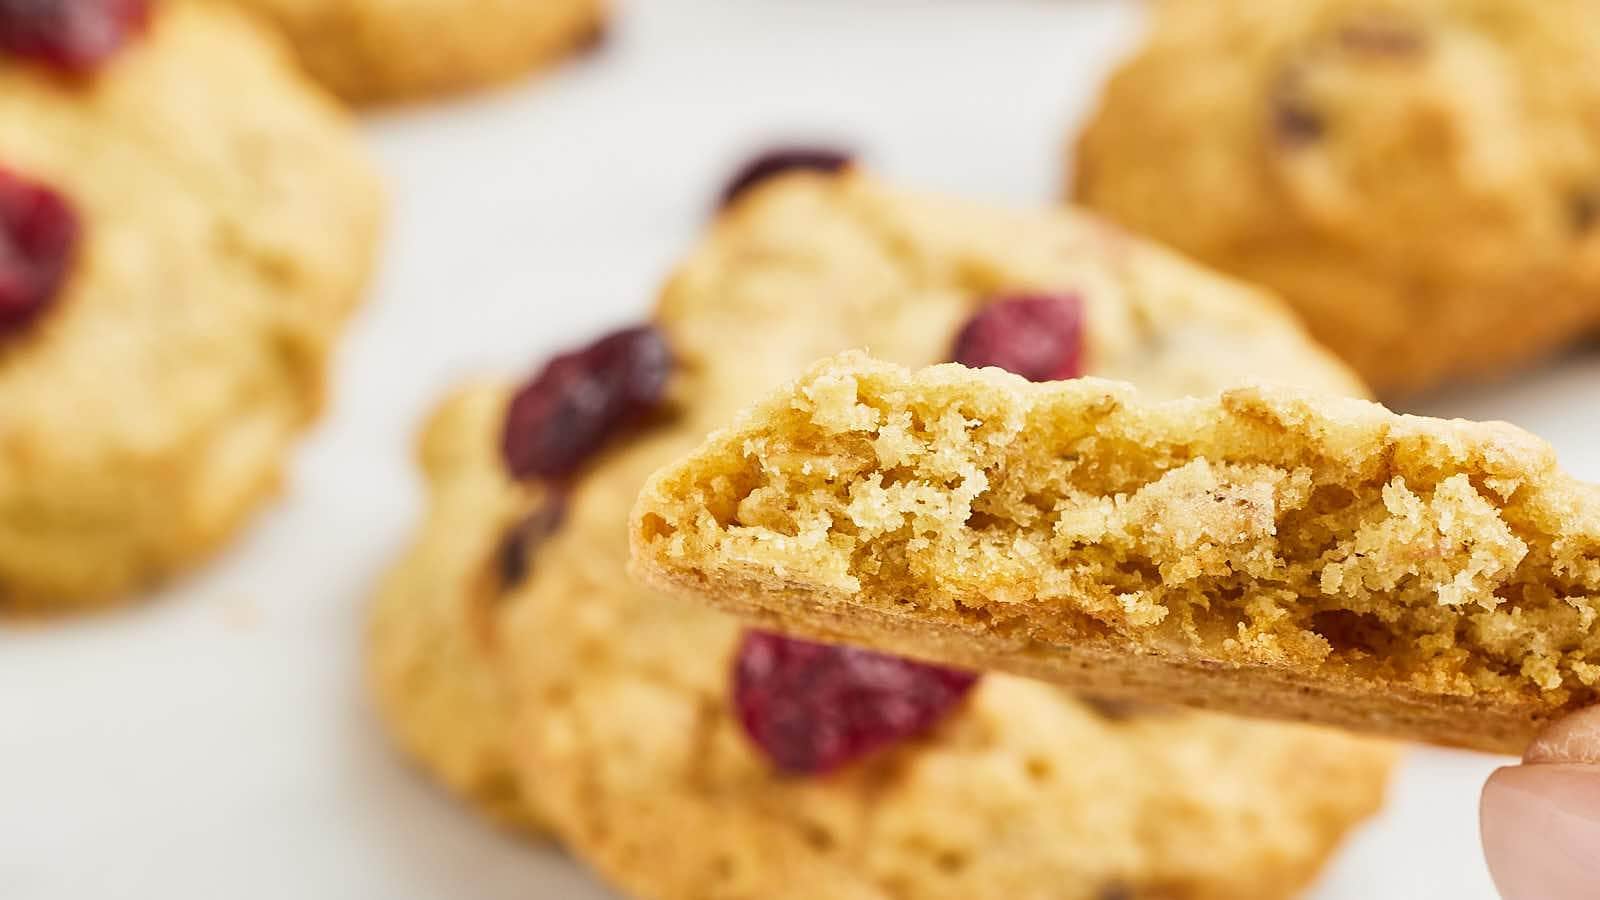 Oatmeal Cranberry Cookies recipe by Cheerful Cook.